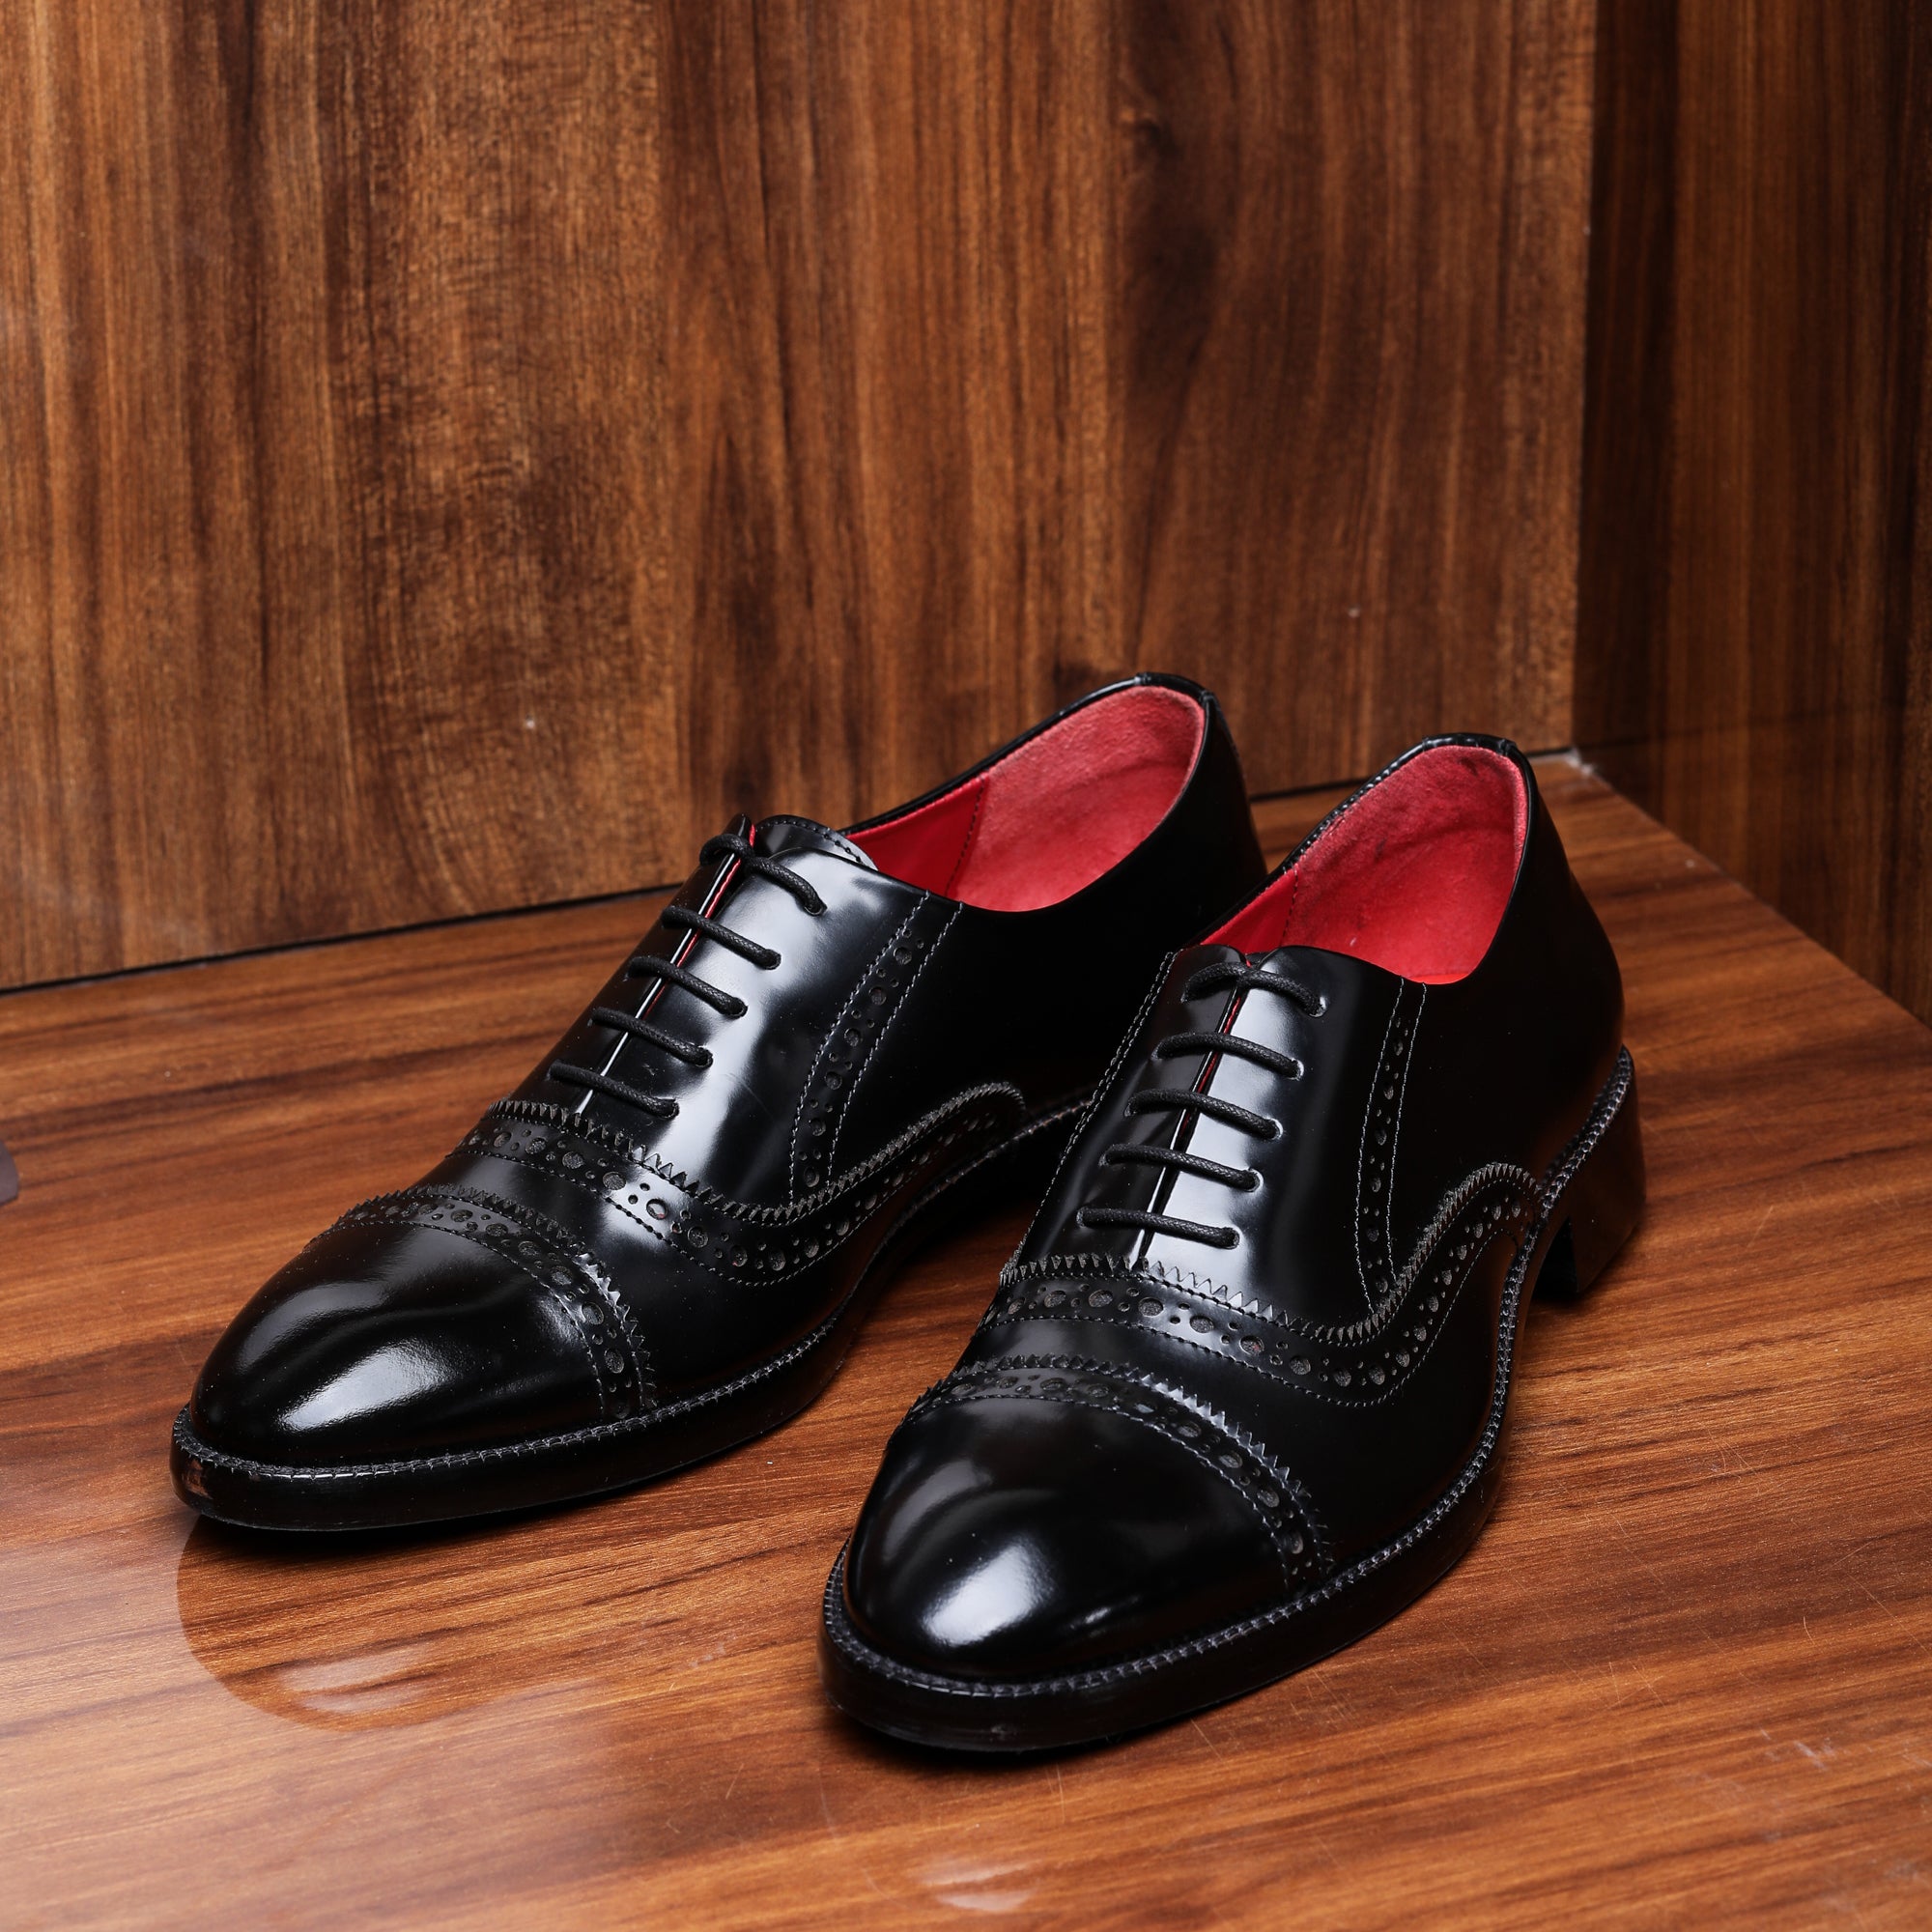 Lethato Classic Captoe Oxford - Wine Red UK 7 / US 7.5 – 8 / Euro 41 / Wine Red